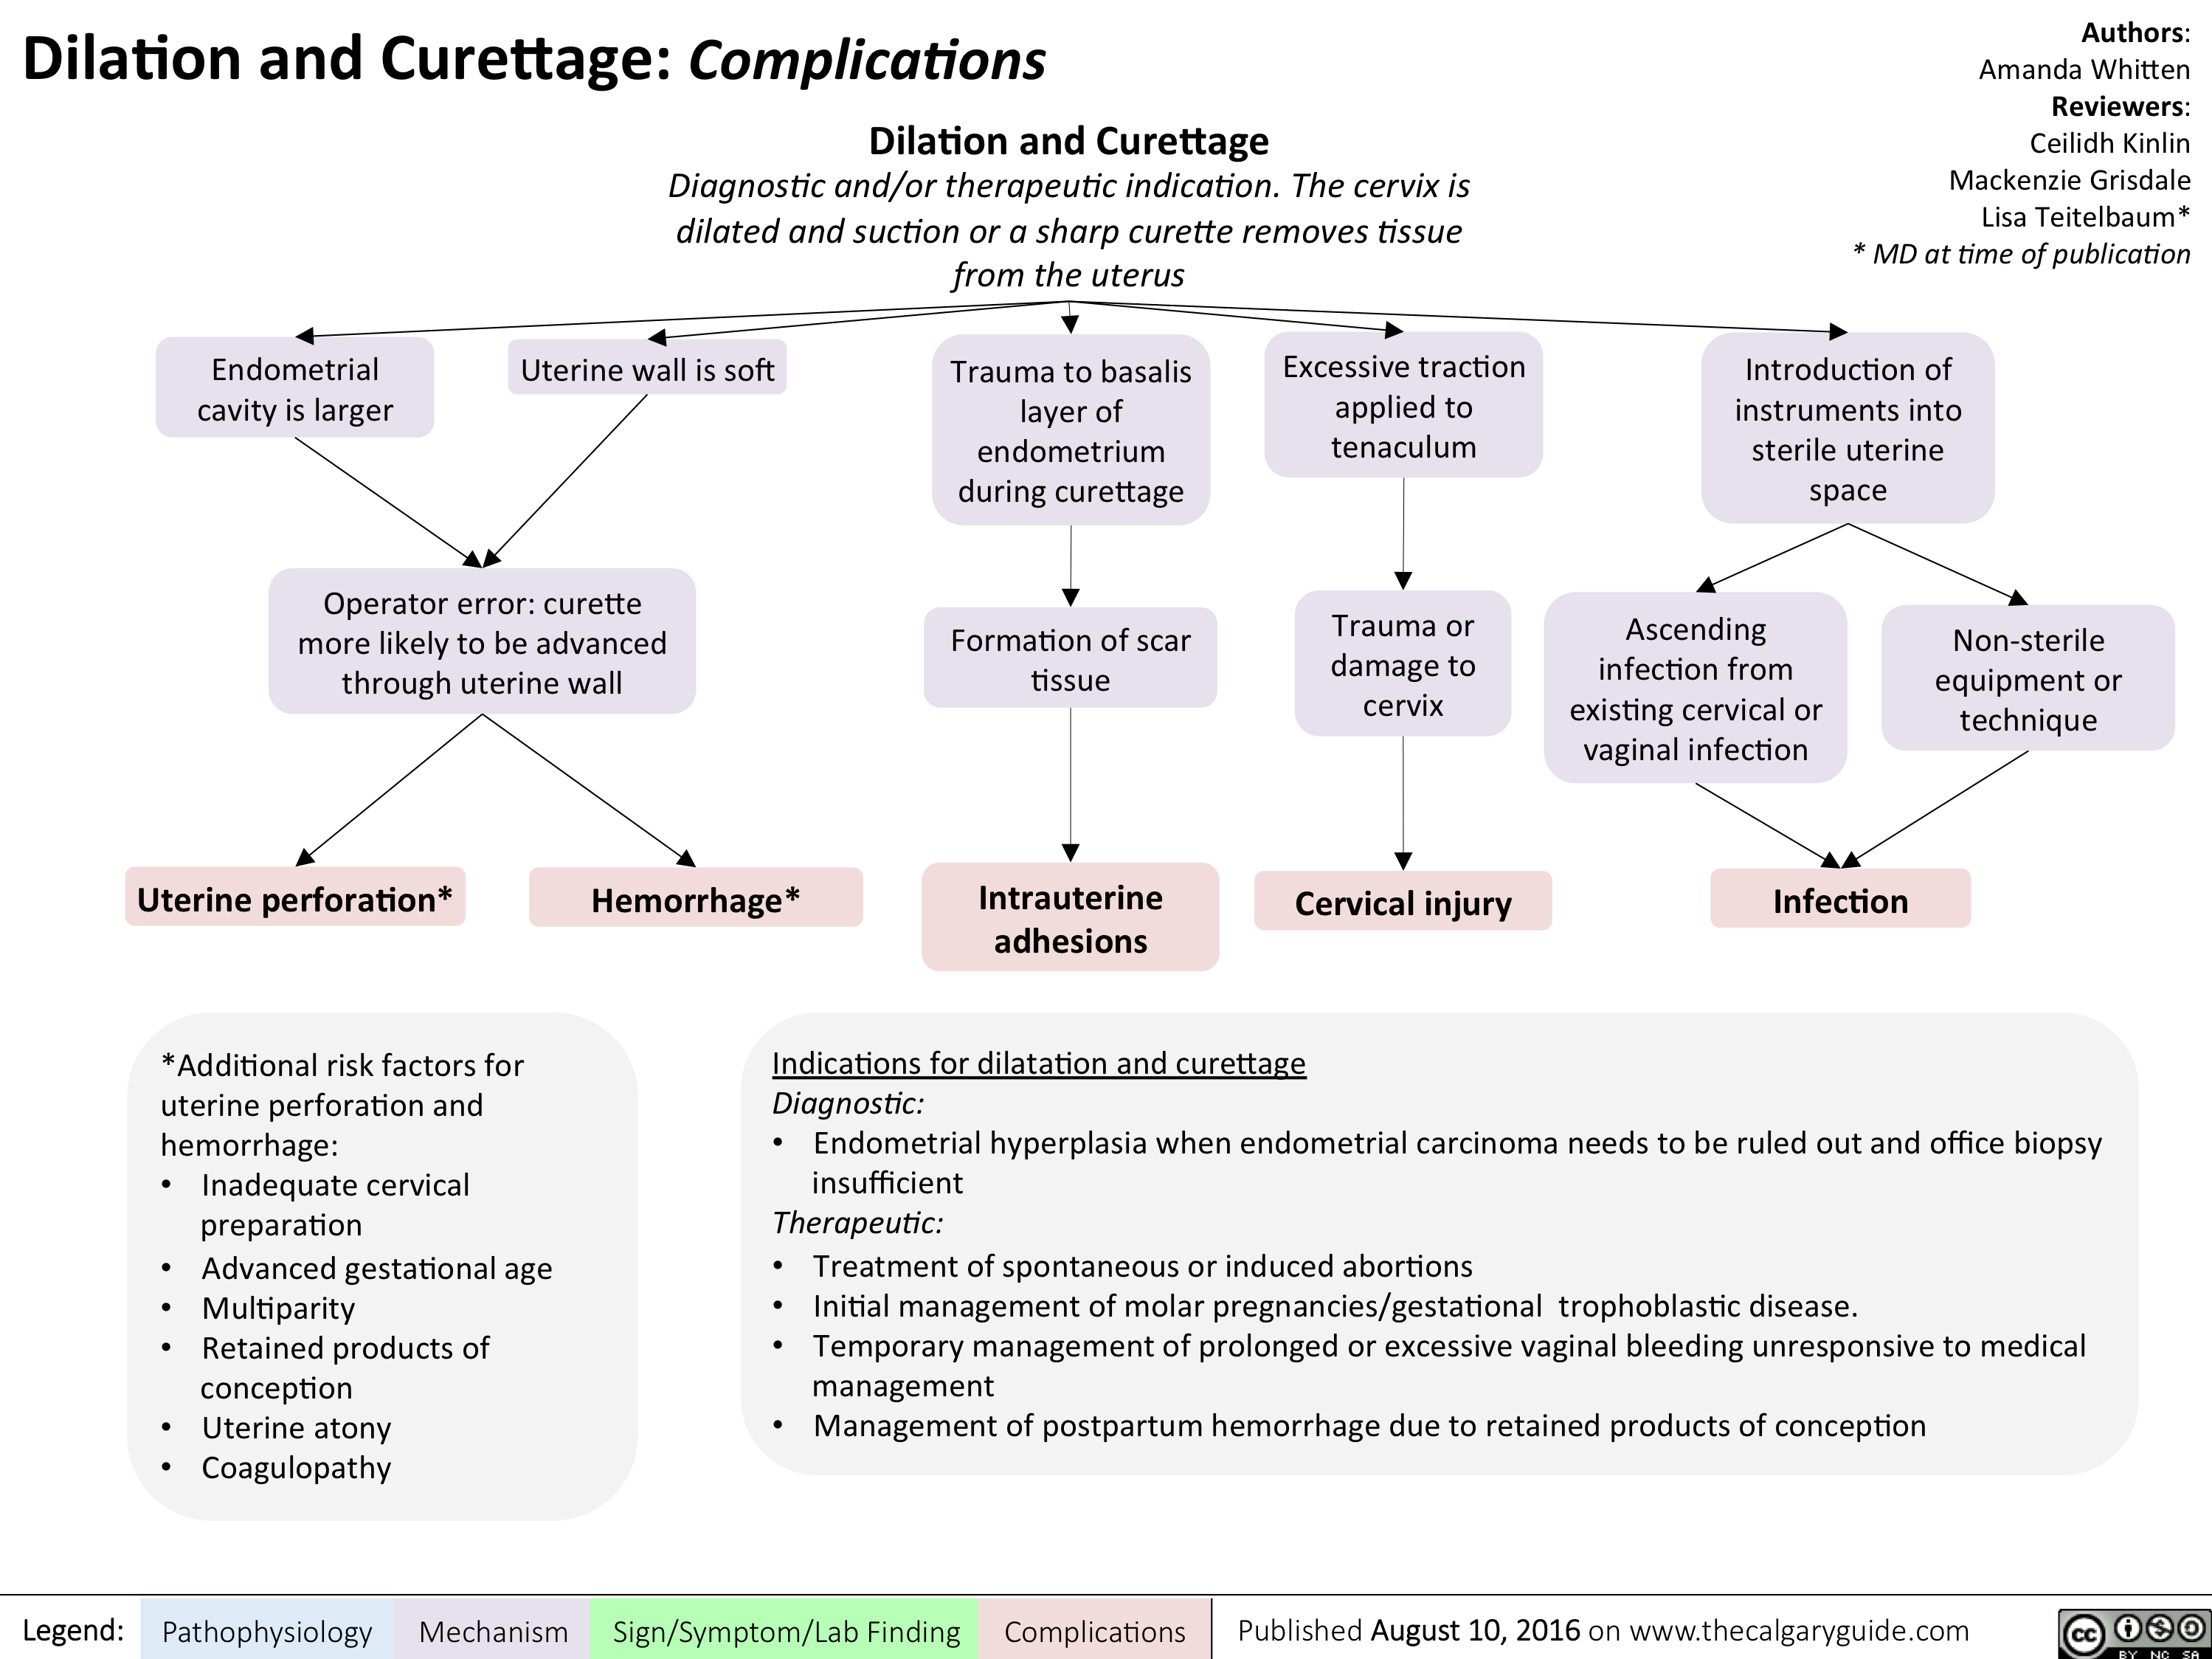 Dilation and Curettage: Complications